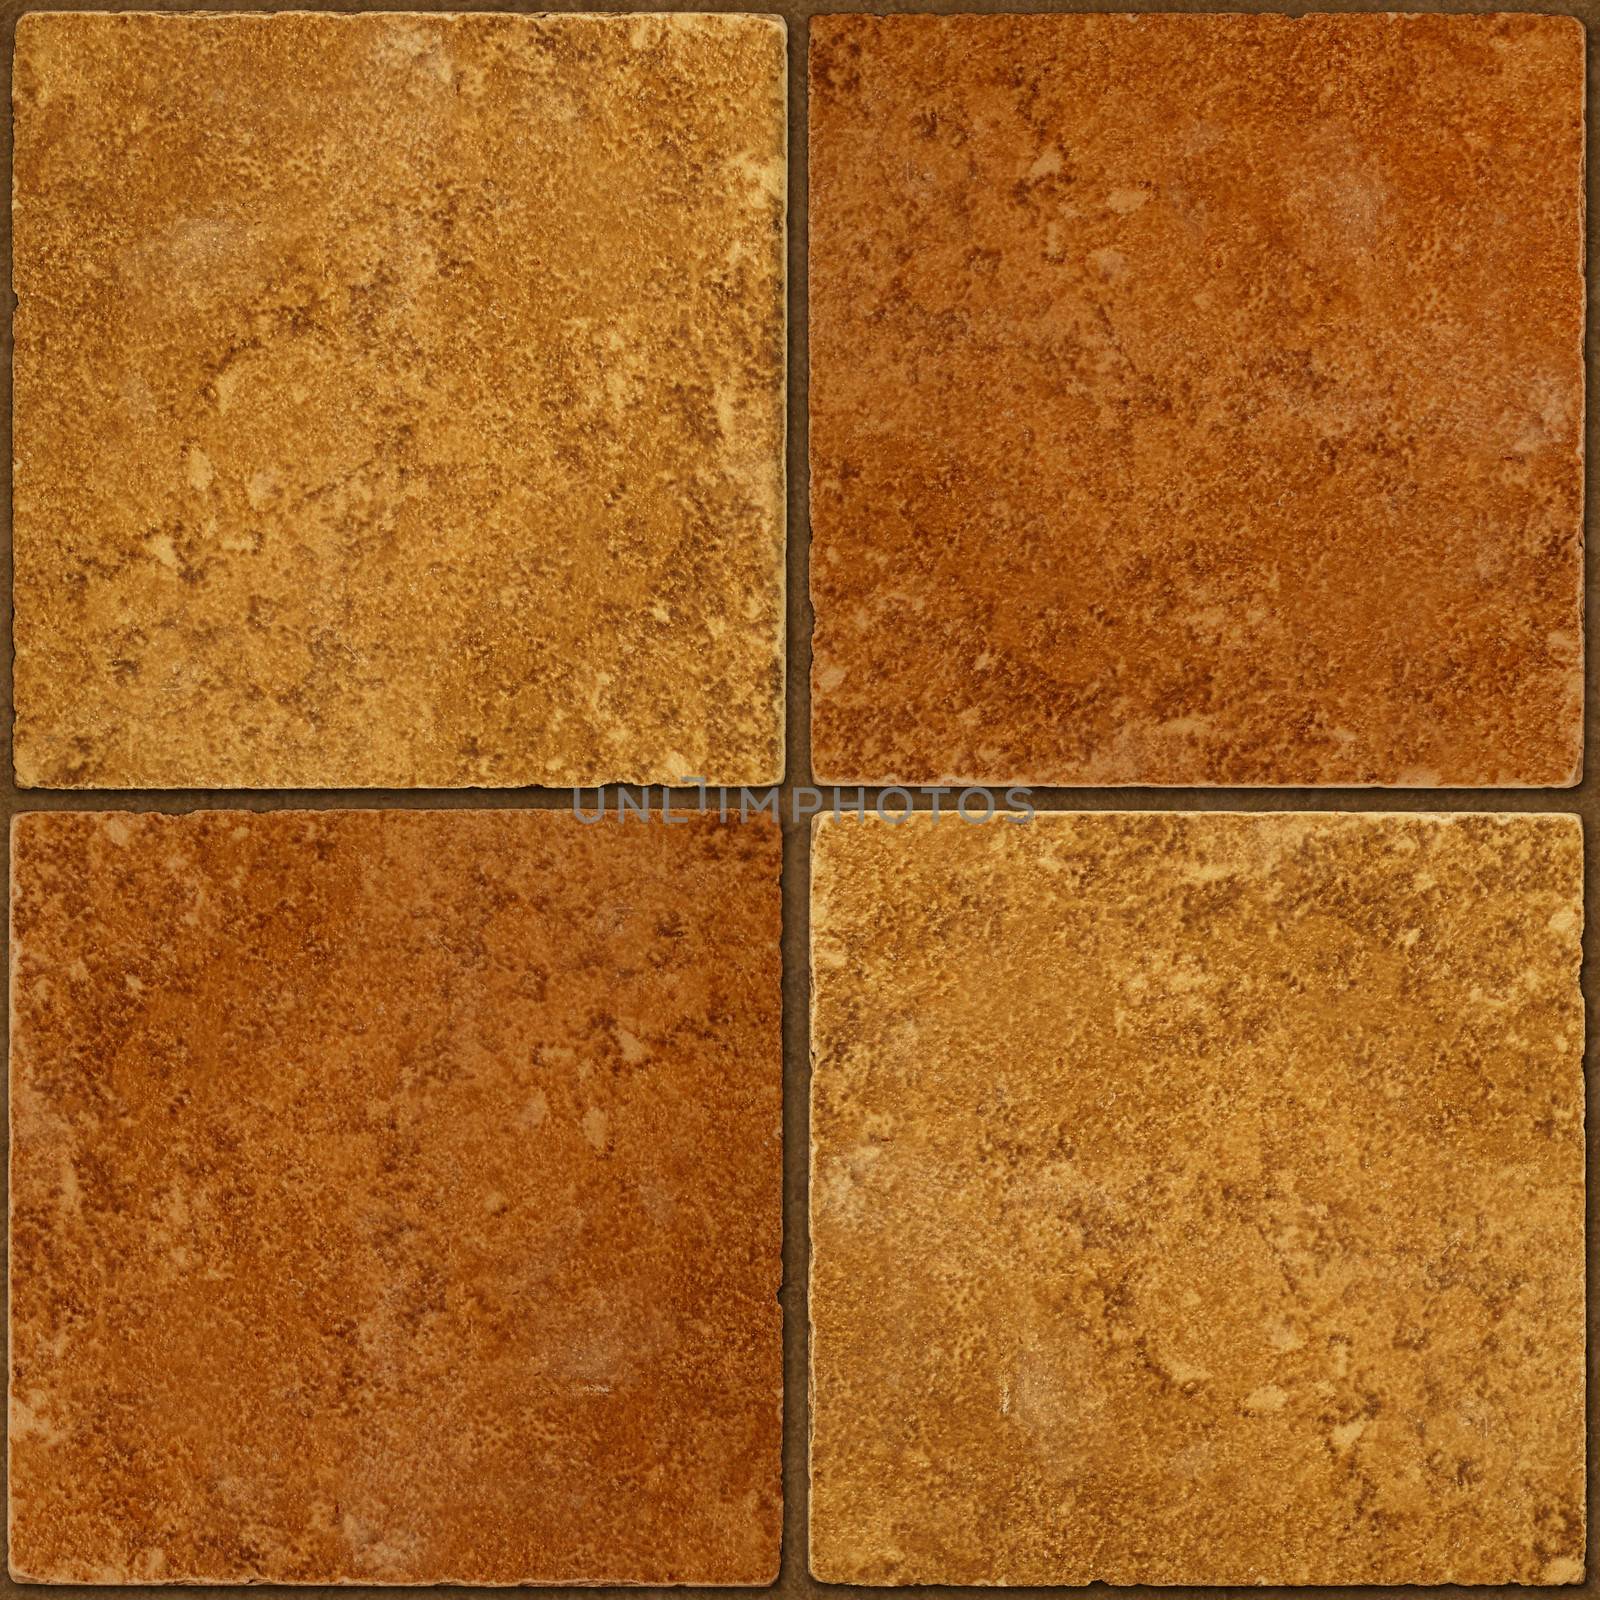 Ceramic two-tone brown stone tiles seamlessly tileable by Balefire9